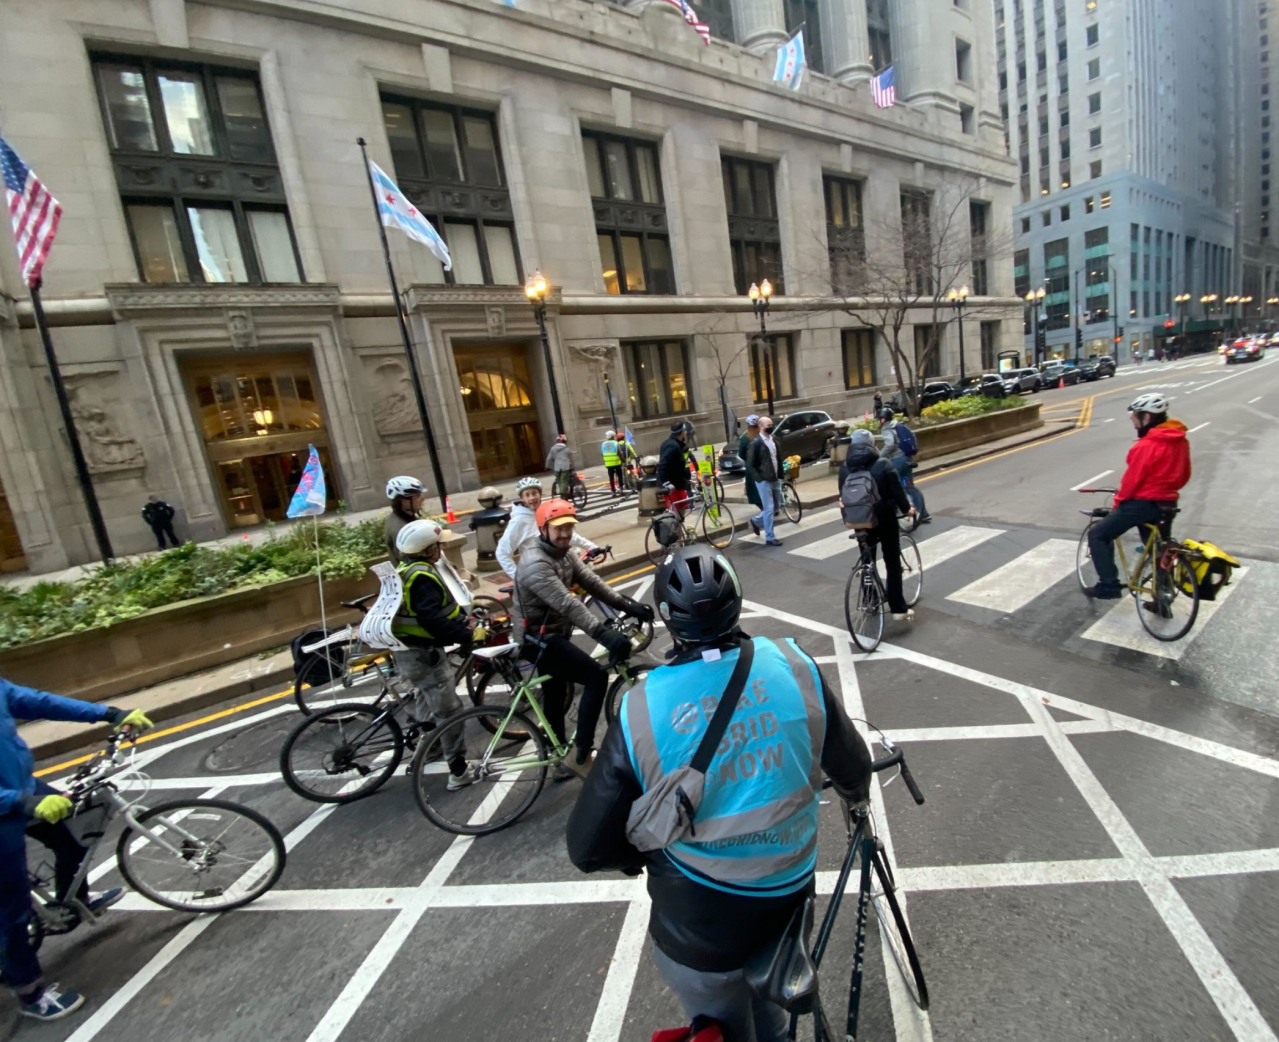 The Chicago, Bike Grid Now blockade of LaSalle Street in front of City Hall. Photo: CBGN